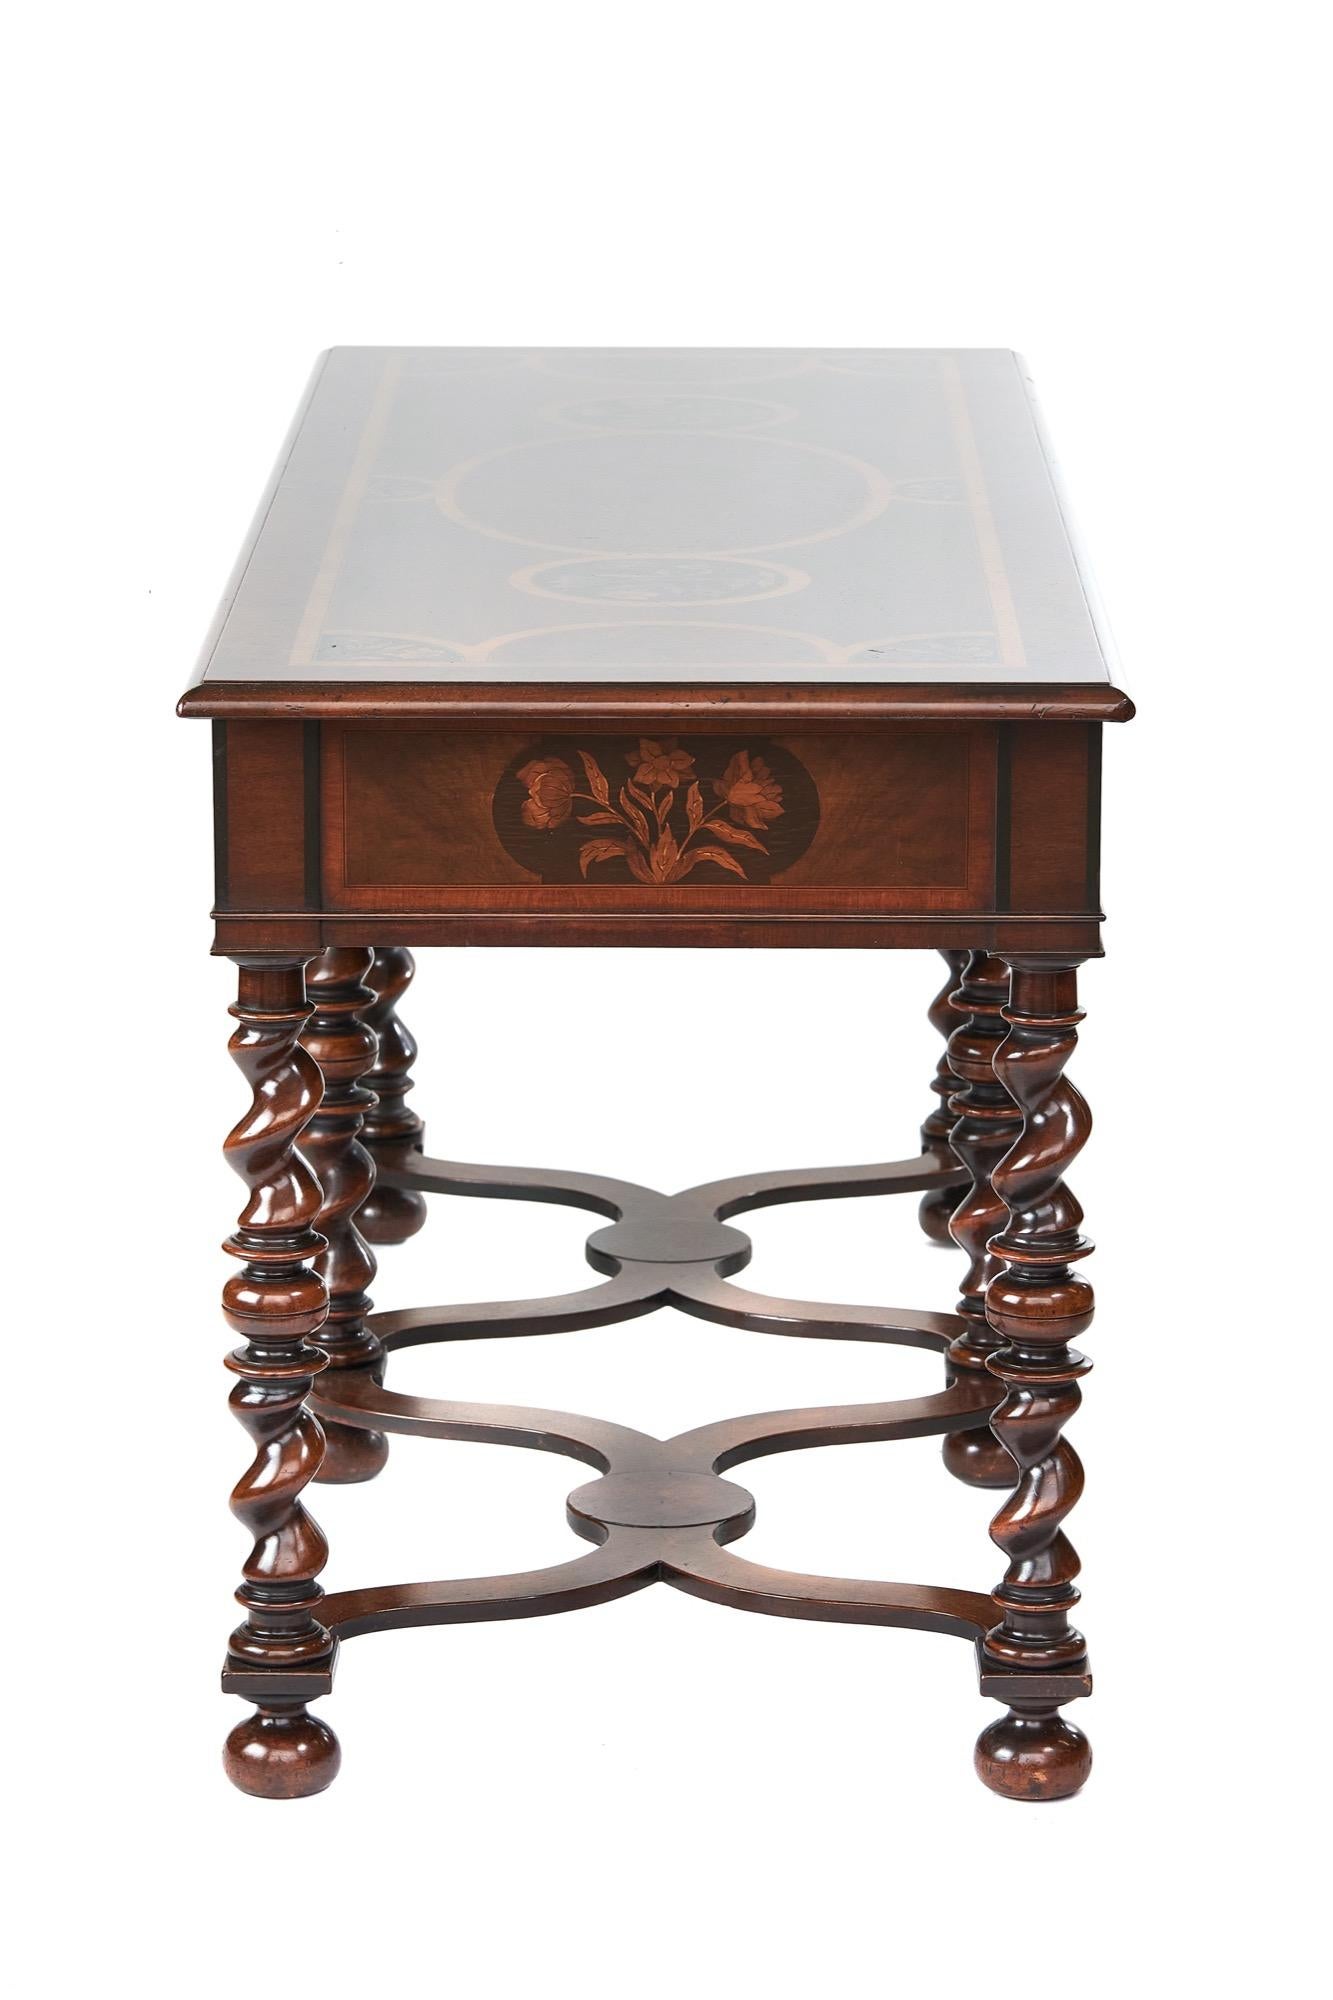 Fine William & Mary Revival walnut & Marquetry inlaid centre table.
circa 1920s,
Walnut inlaid top, with;
Burr walnut, & floral Marquetry inlaid panels, Burr walnut cross banding,
Front / back /and side apron : with 
Walnut cross banding ,